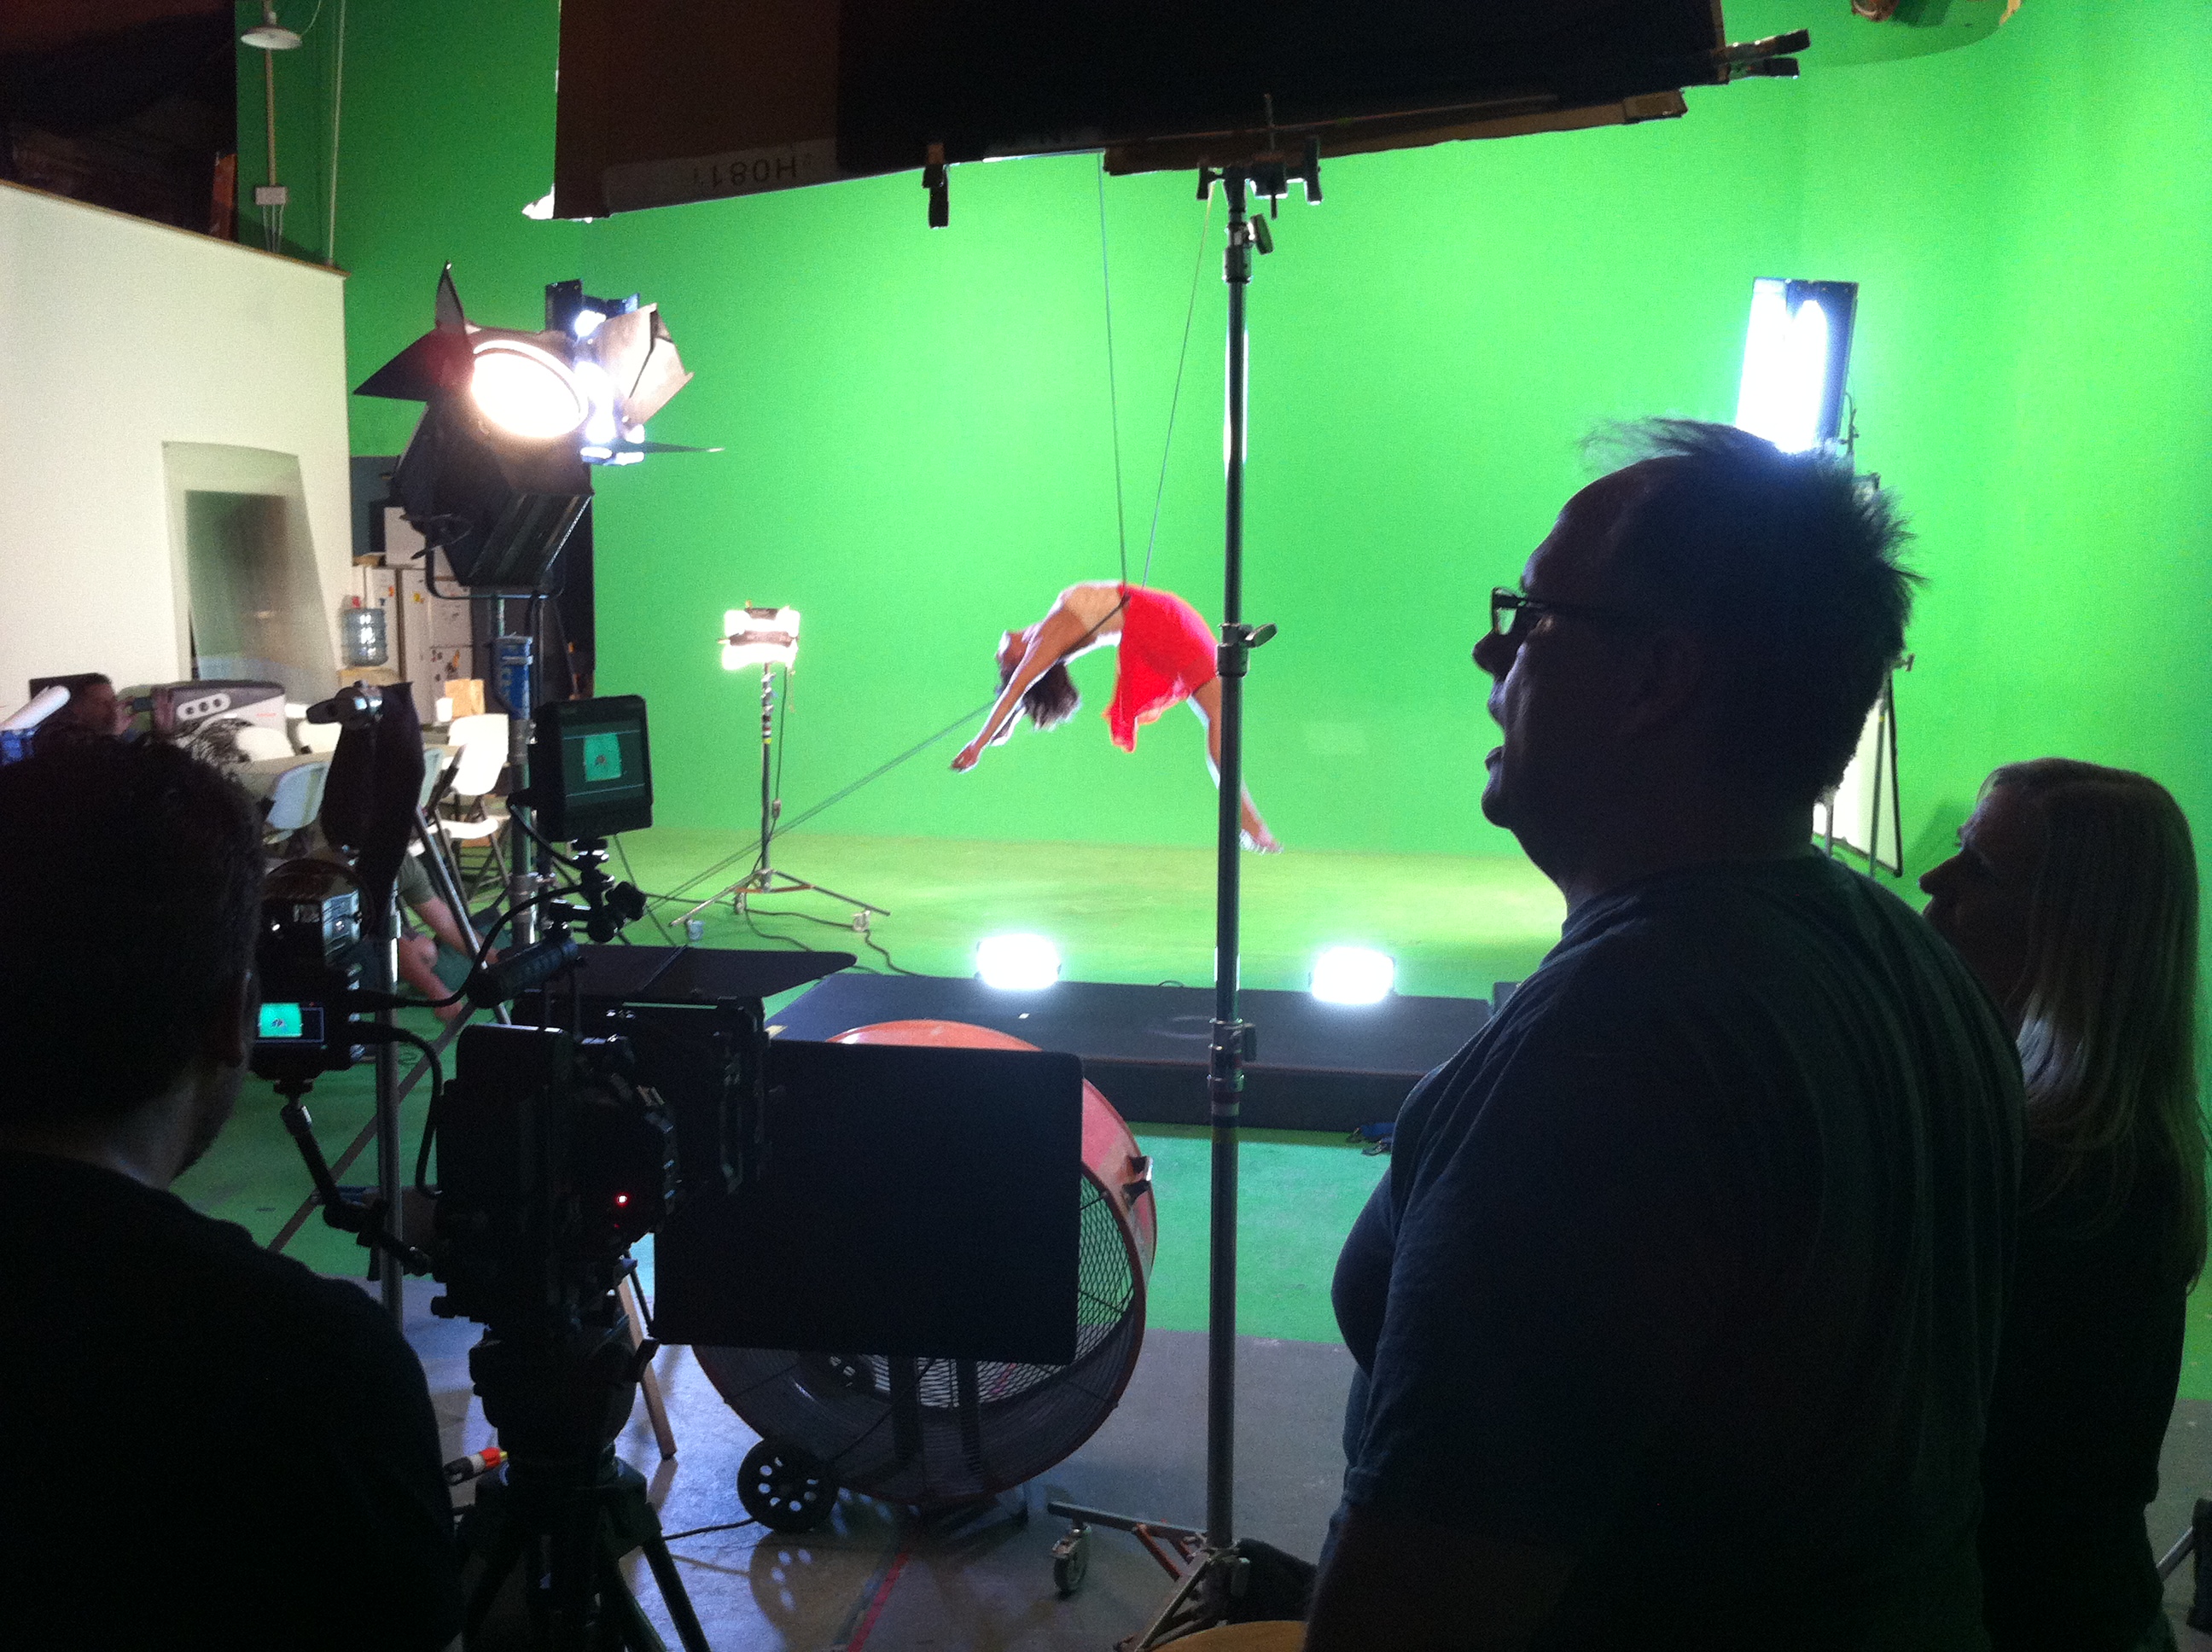 Music video shoot at TDJ/Creative Studios, North Hollywood. Stunts, green screen and wire work day.